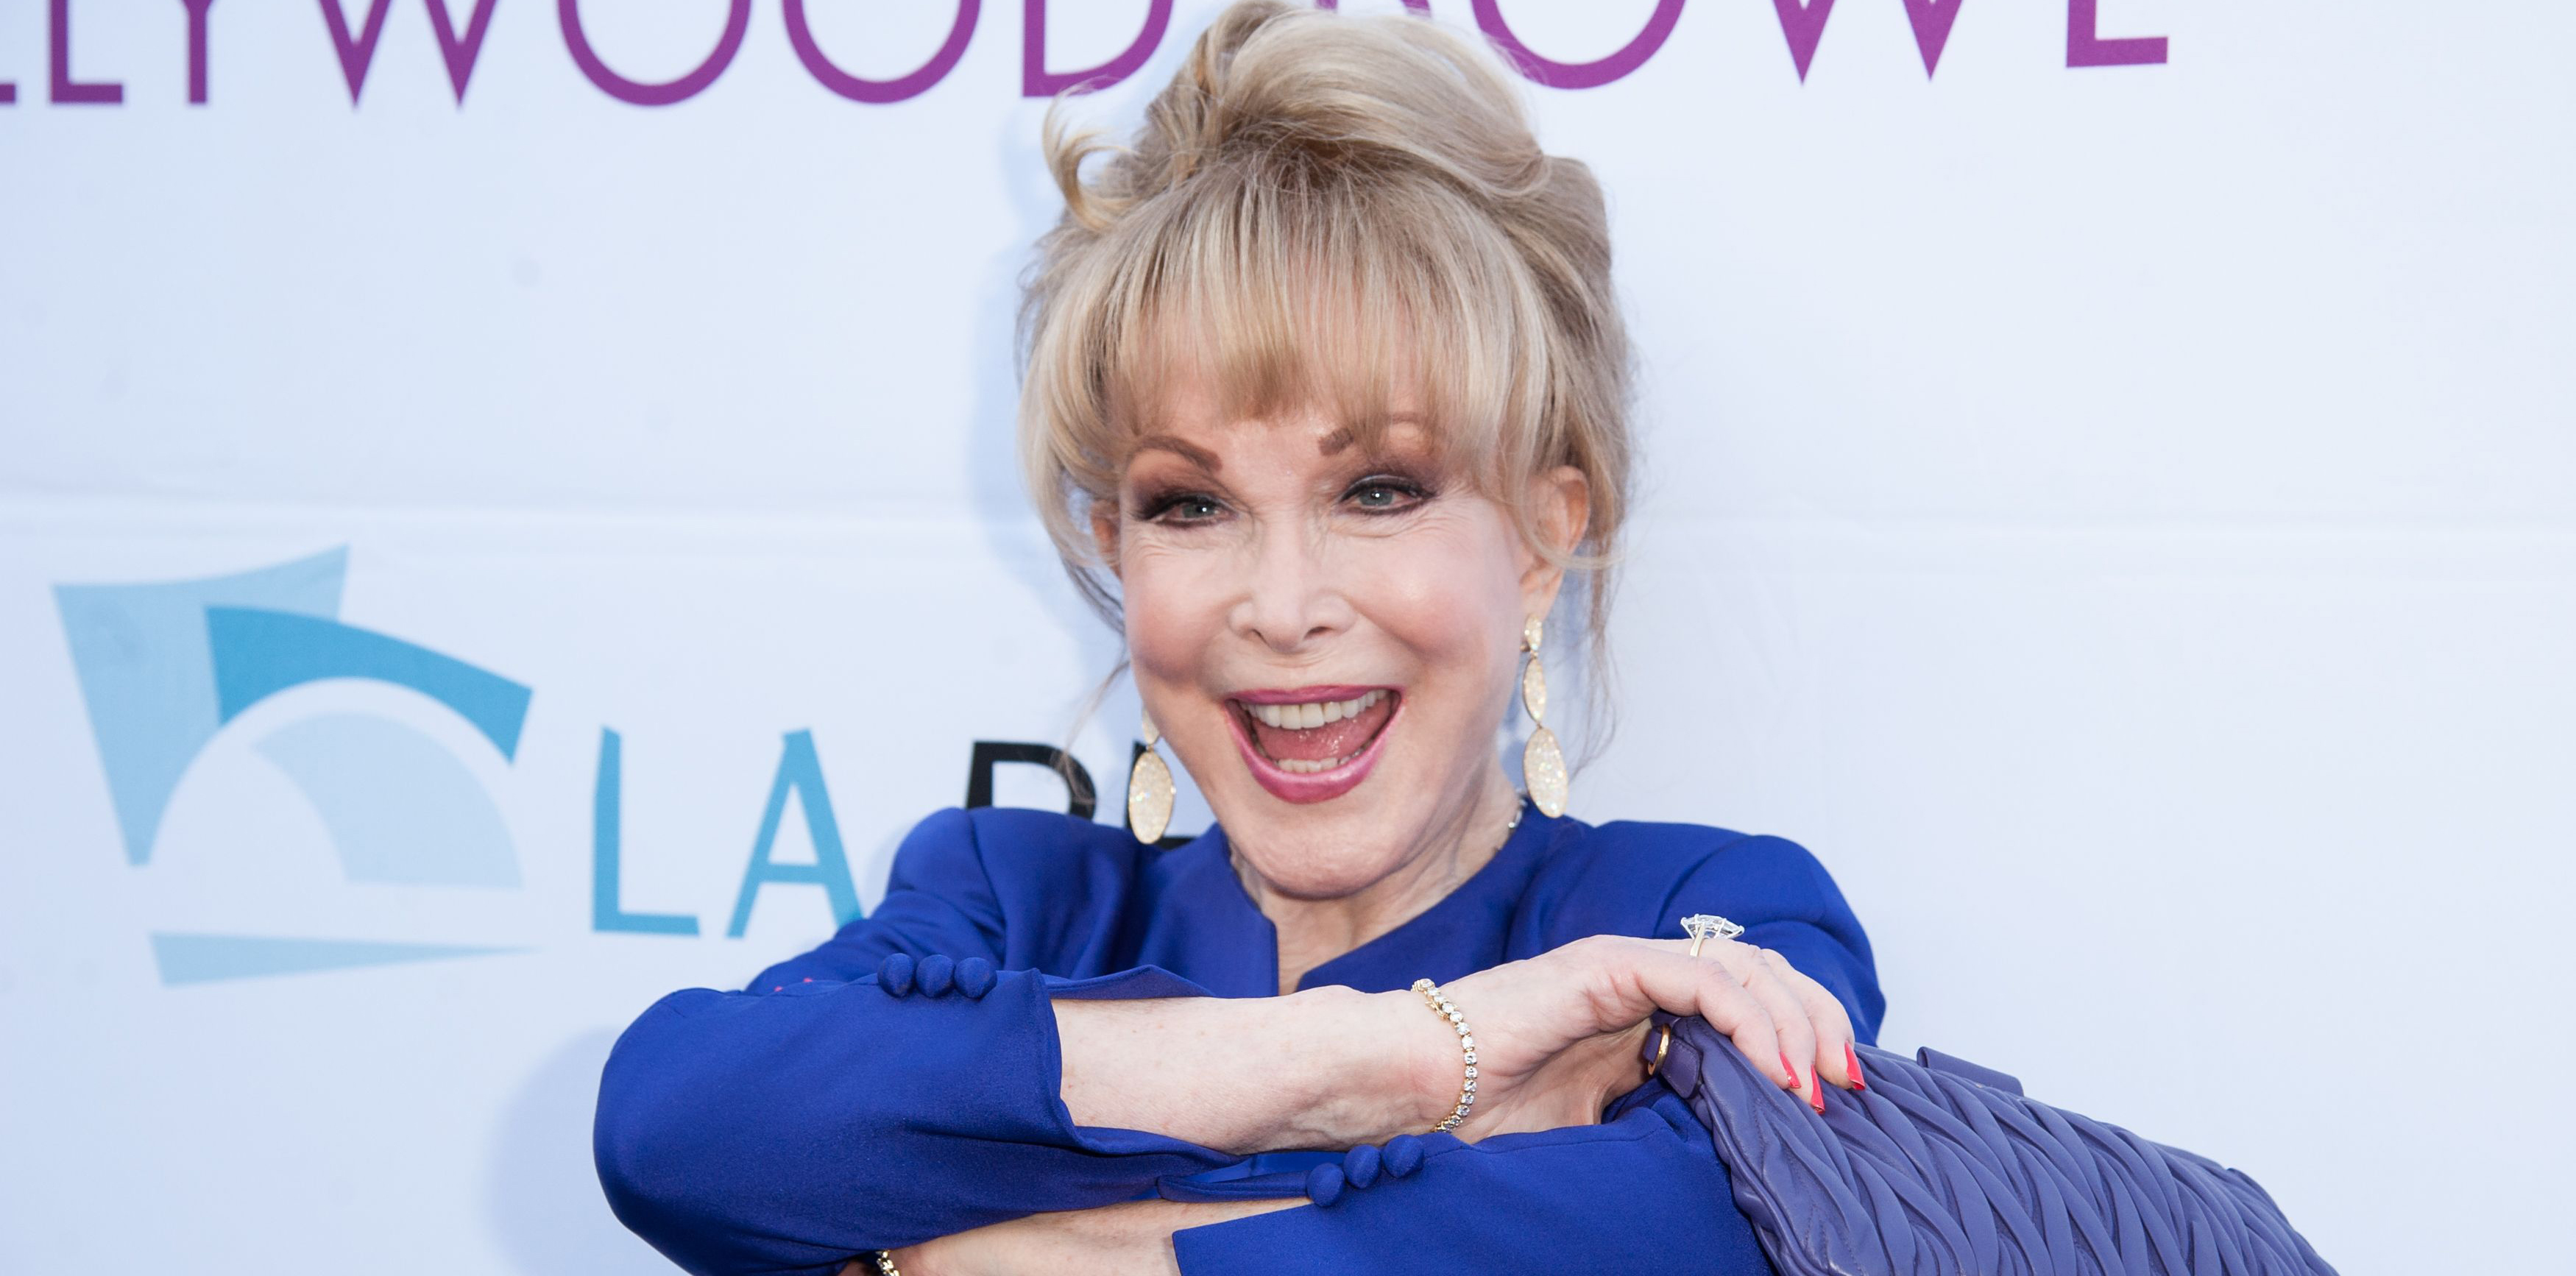 Nude Beach Gothic - I Dream of Jeannie' Star Barbara Eden: A Look Back at Her Life